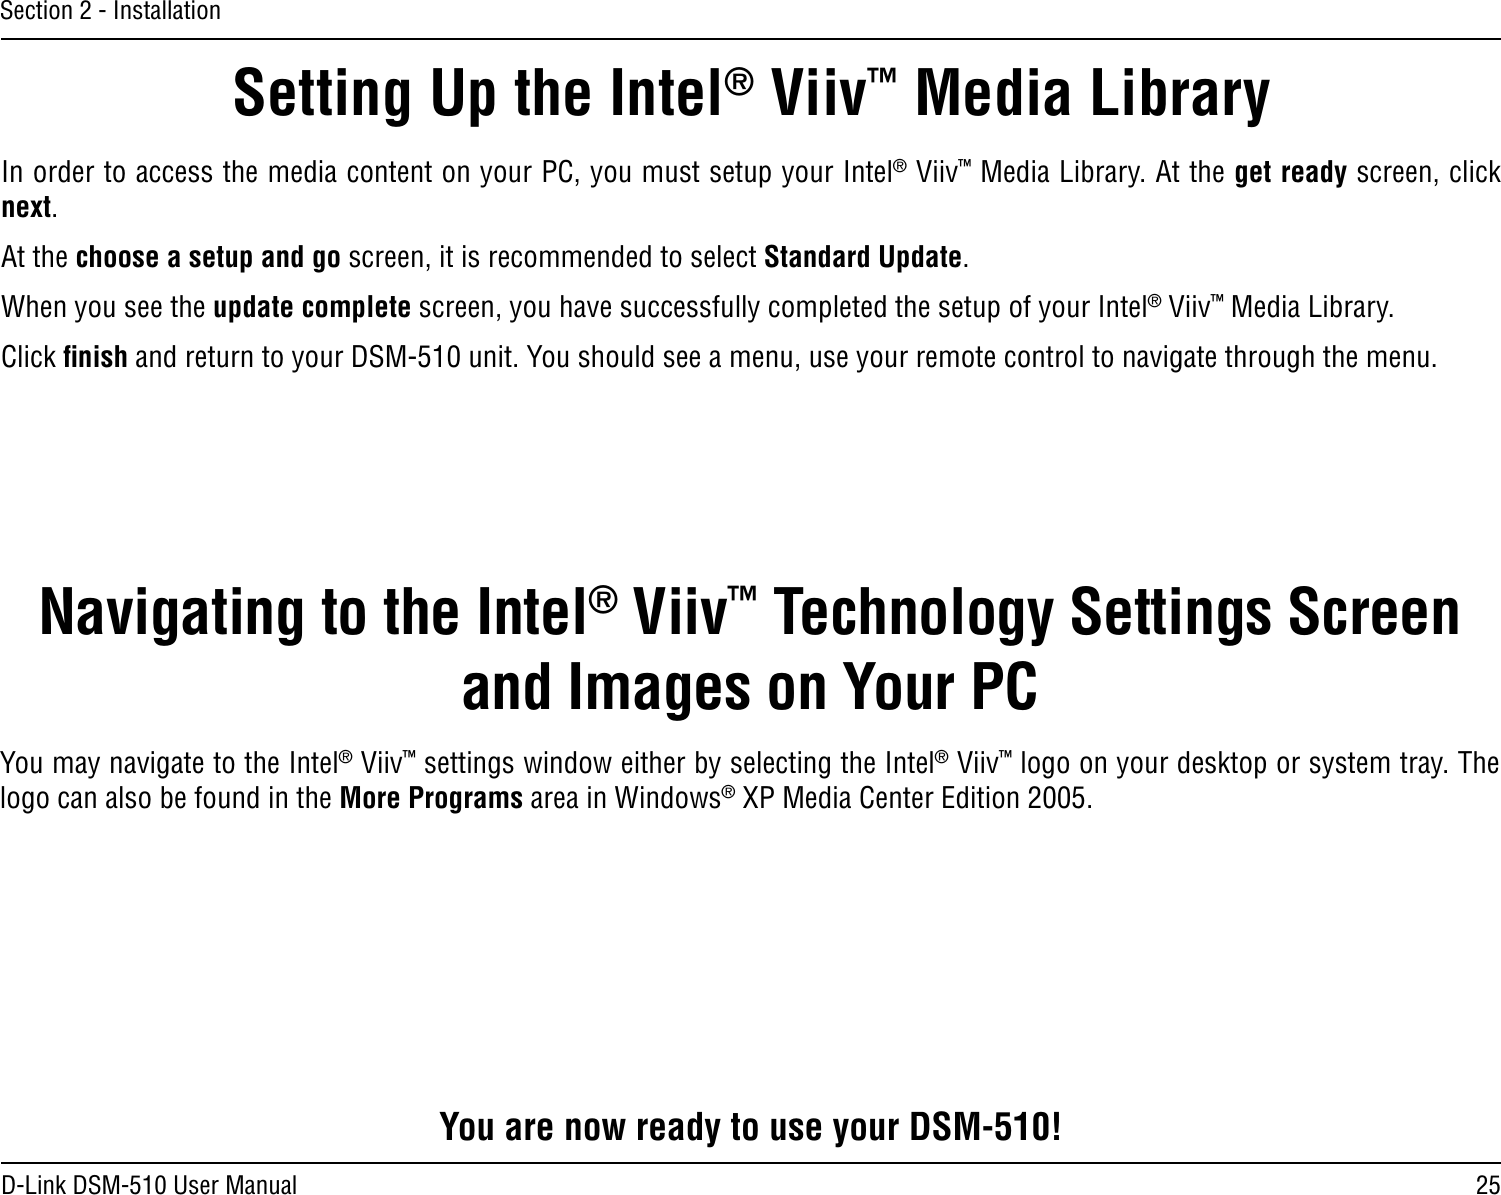 25D-Link DSM-510 User ManualSection 2 - InstallationIn order to access the media content on your PC, you must setup your Intel® Viiv™ Media Library. At the get ready screen, click next.At the choose a setup and go screen, it is recommended to select Standard Update.When you see the update complete screen, you have successfully completed the setup of your Intel® Viiv™ Media Library. Click ﬁnish and return to your DSM-510 unit. You should see a menu, use your remote control to navigate through the menu.Setting Up the Intel® Viiv™ Media LibraryYou are now ready to use your DSM-510!Navigating to the Intel® Viiv™ Technology Settings Screen and Images on Your PCYou may navigate to the Intel® Viiv™ settings window either by selecting the Intel® Viiv™ logo on your desktop or system tray. The logo can also be found in the More Programs area in Windows® XP Media Center Edition 2005.